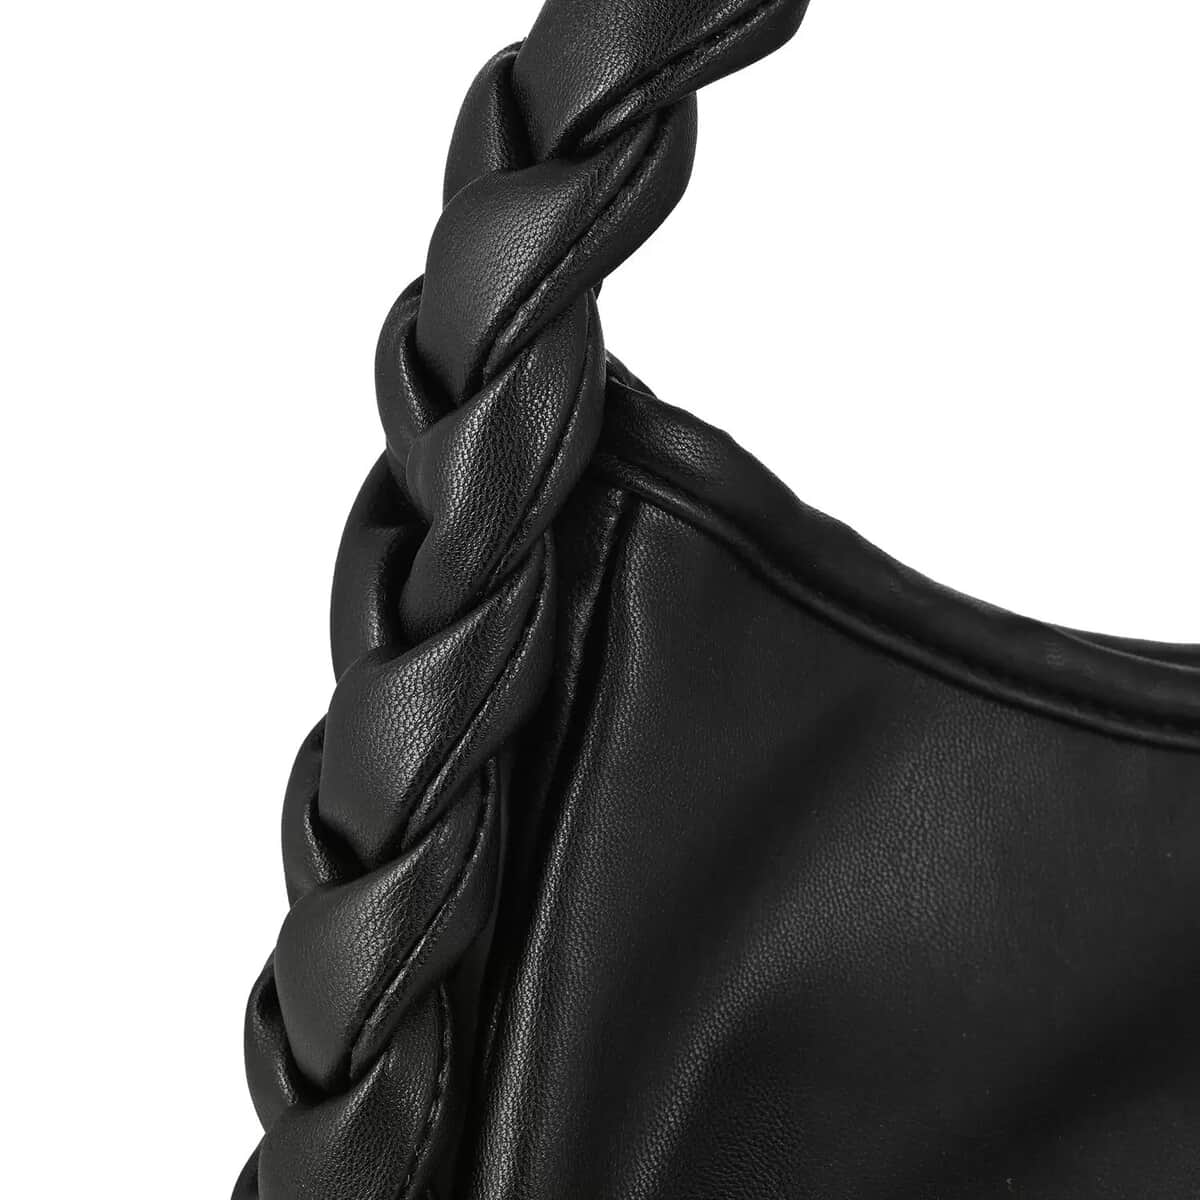 Designer Closeout Collection 18 Black Braided Handle Vegan Leather Hobo Bag (10x7.5x2.3”) with Adjustable Long Strap (51”) image number 4